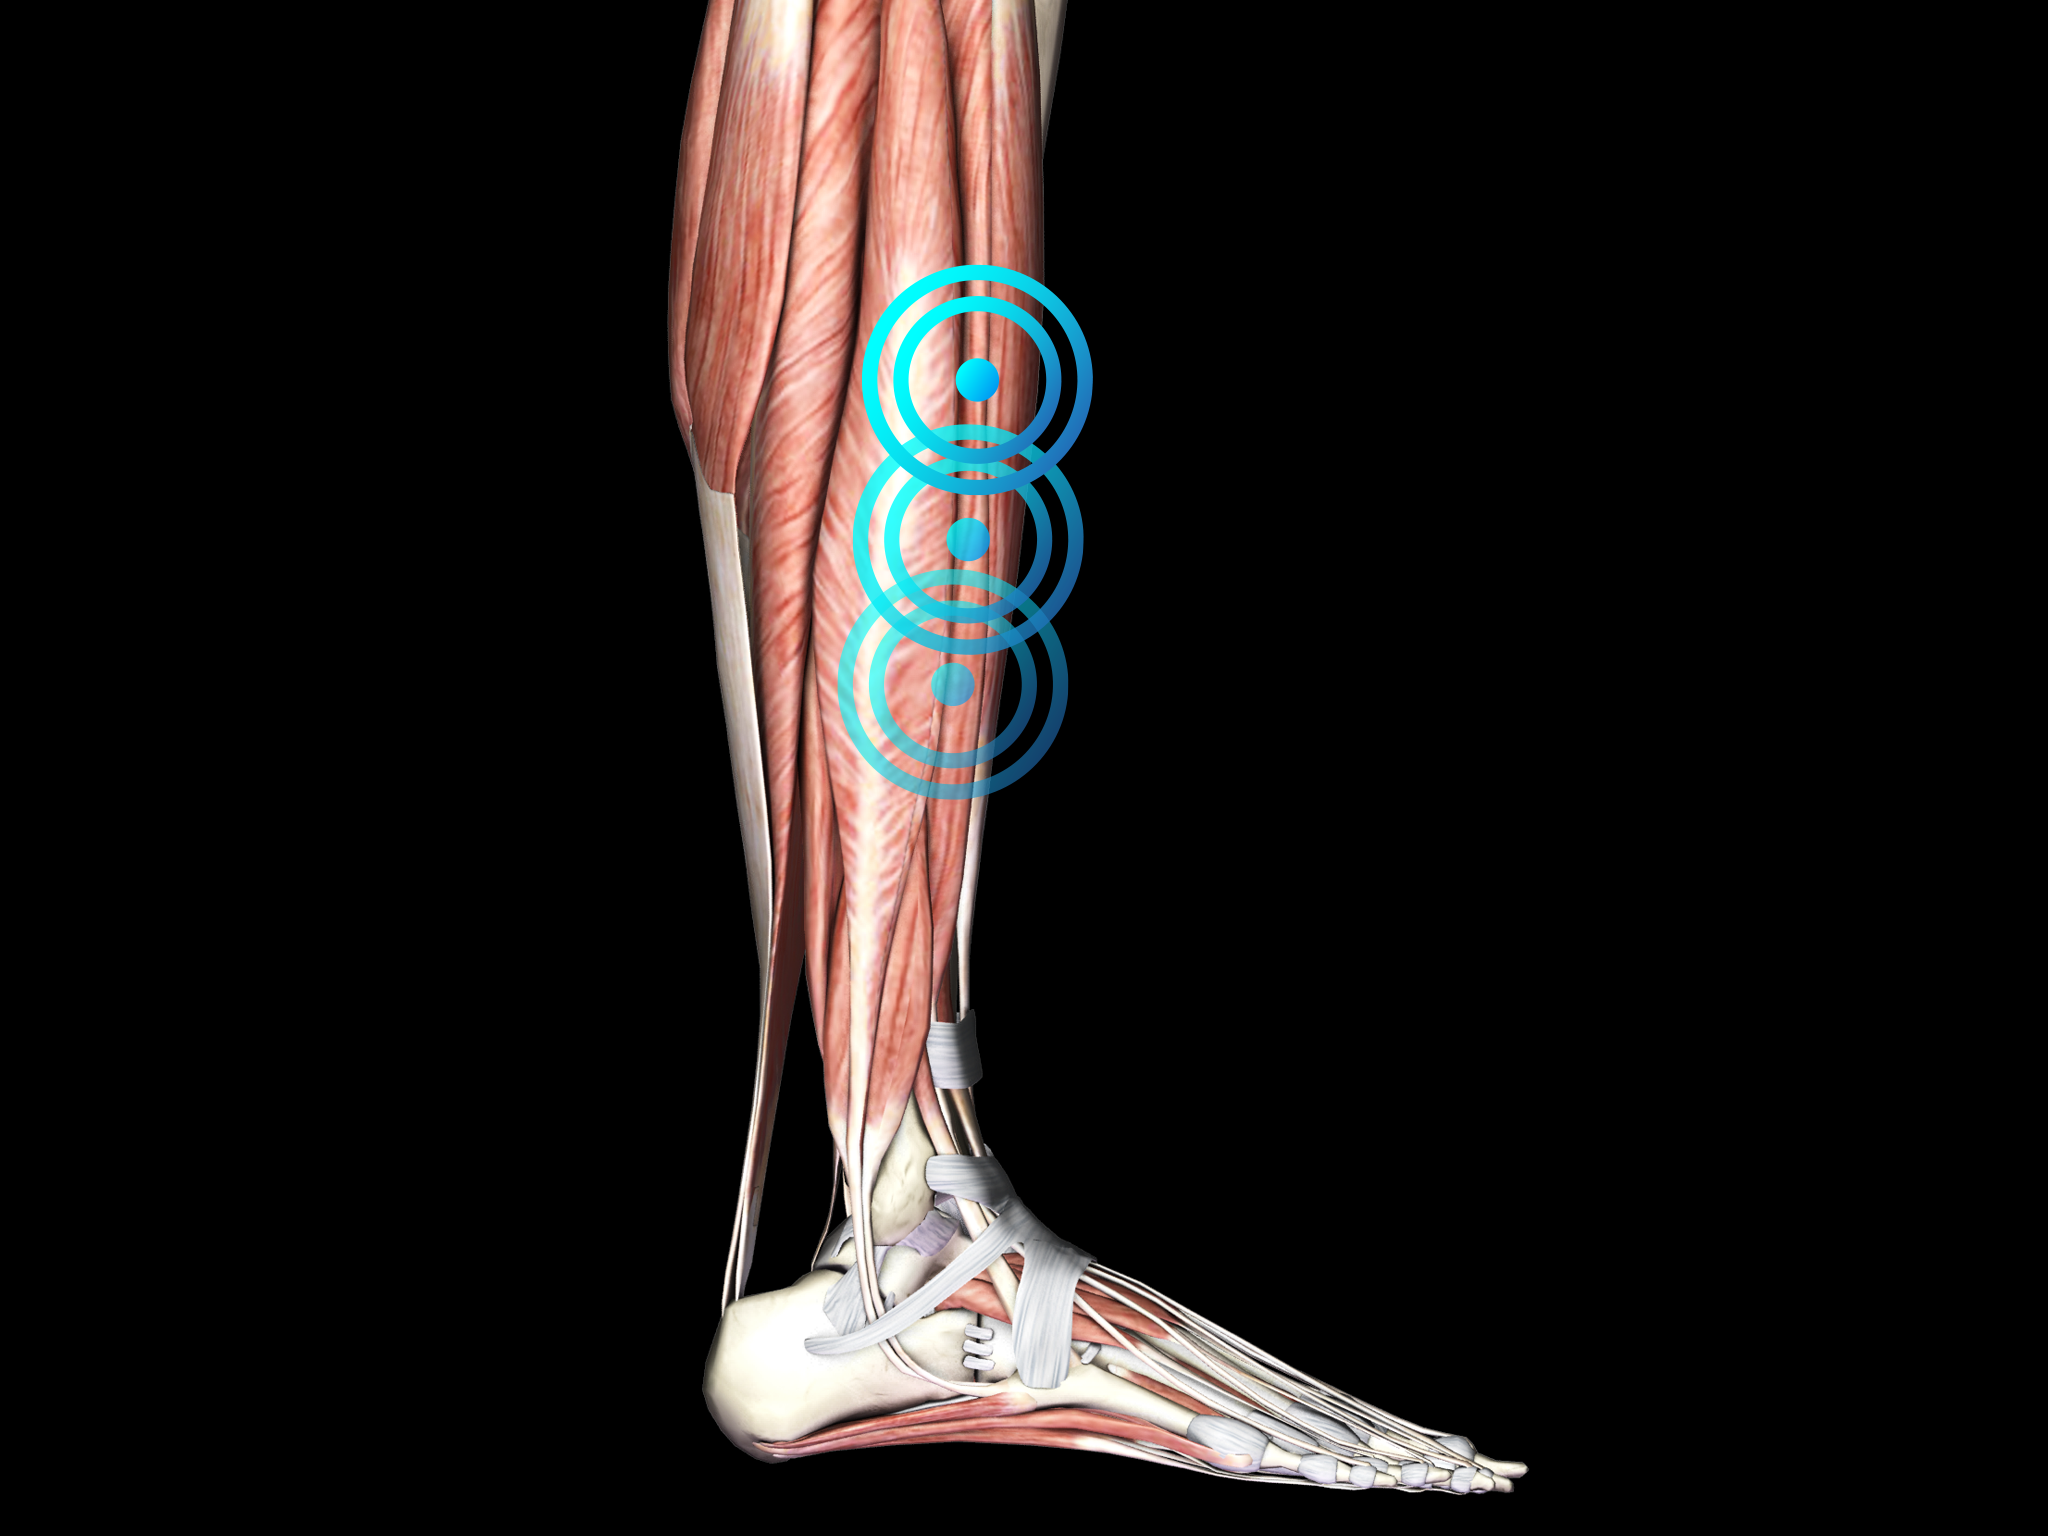 Medial tibial stress syndrome